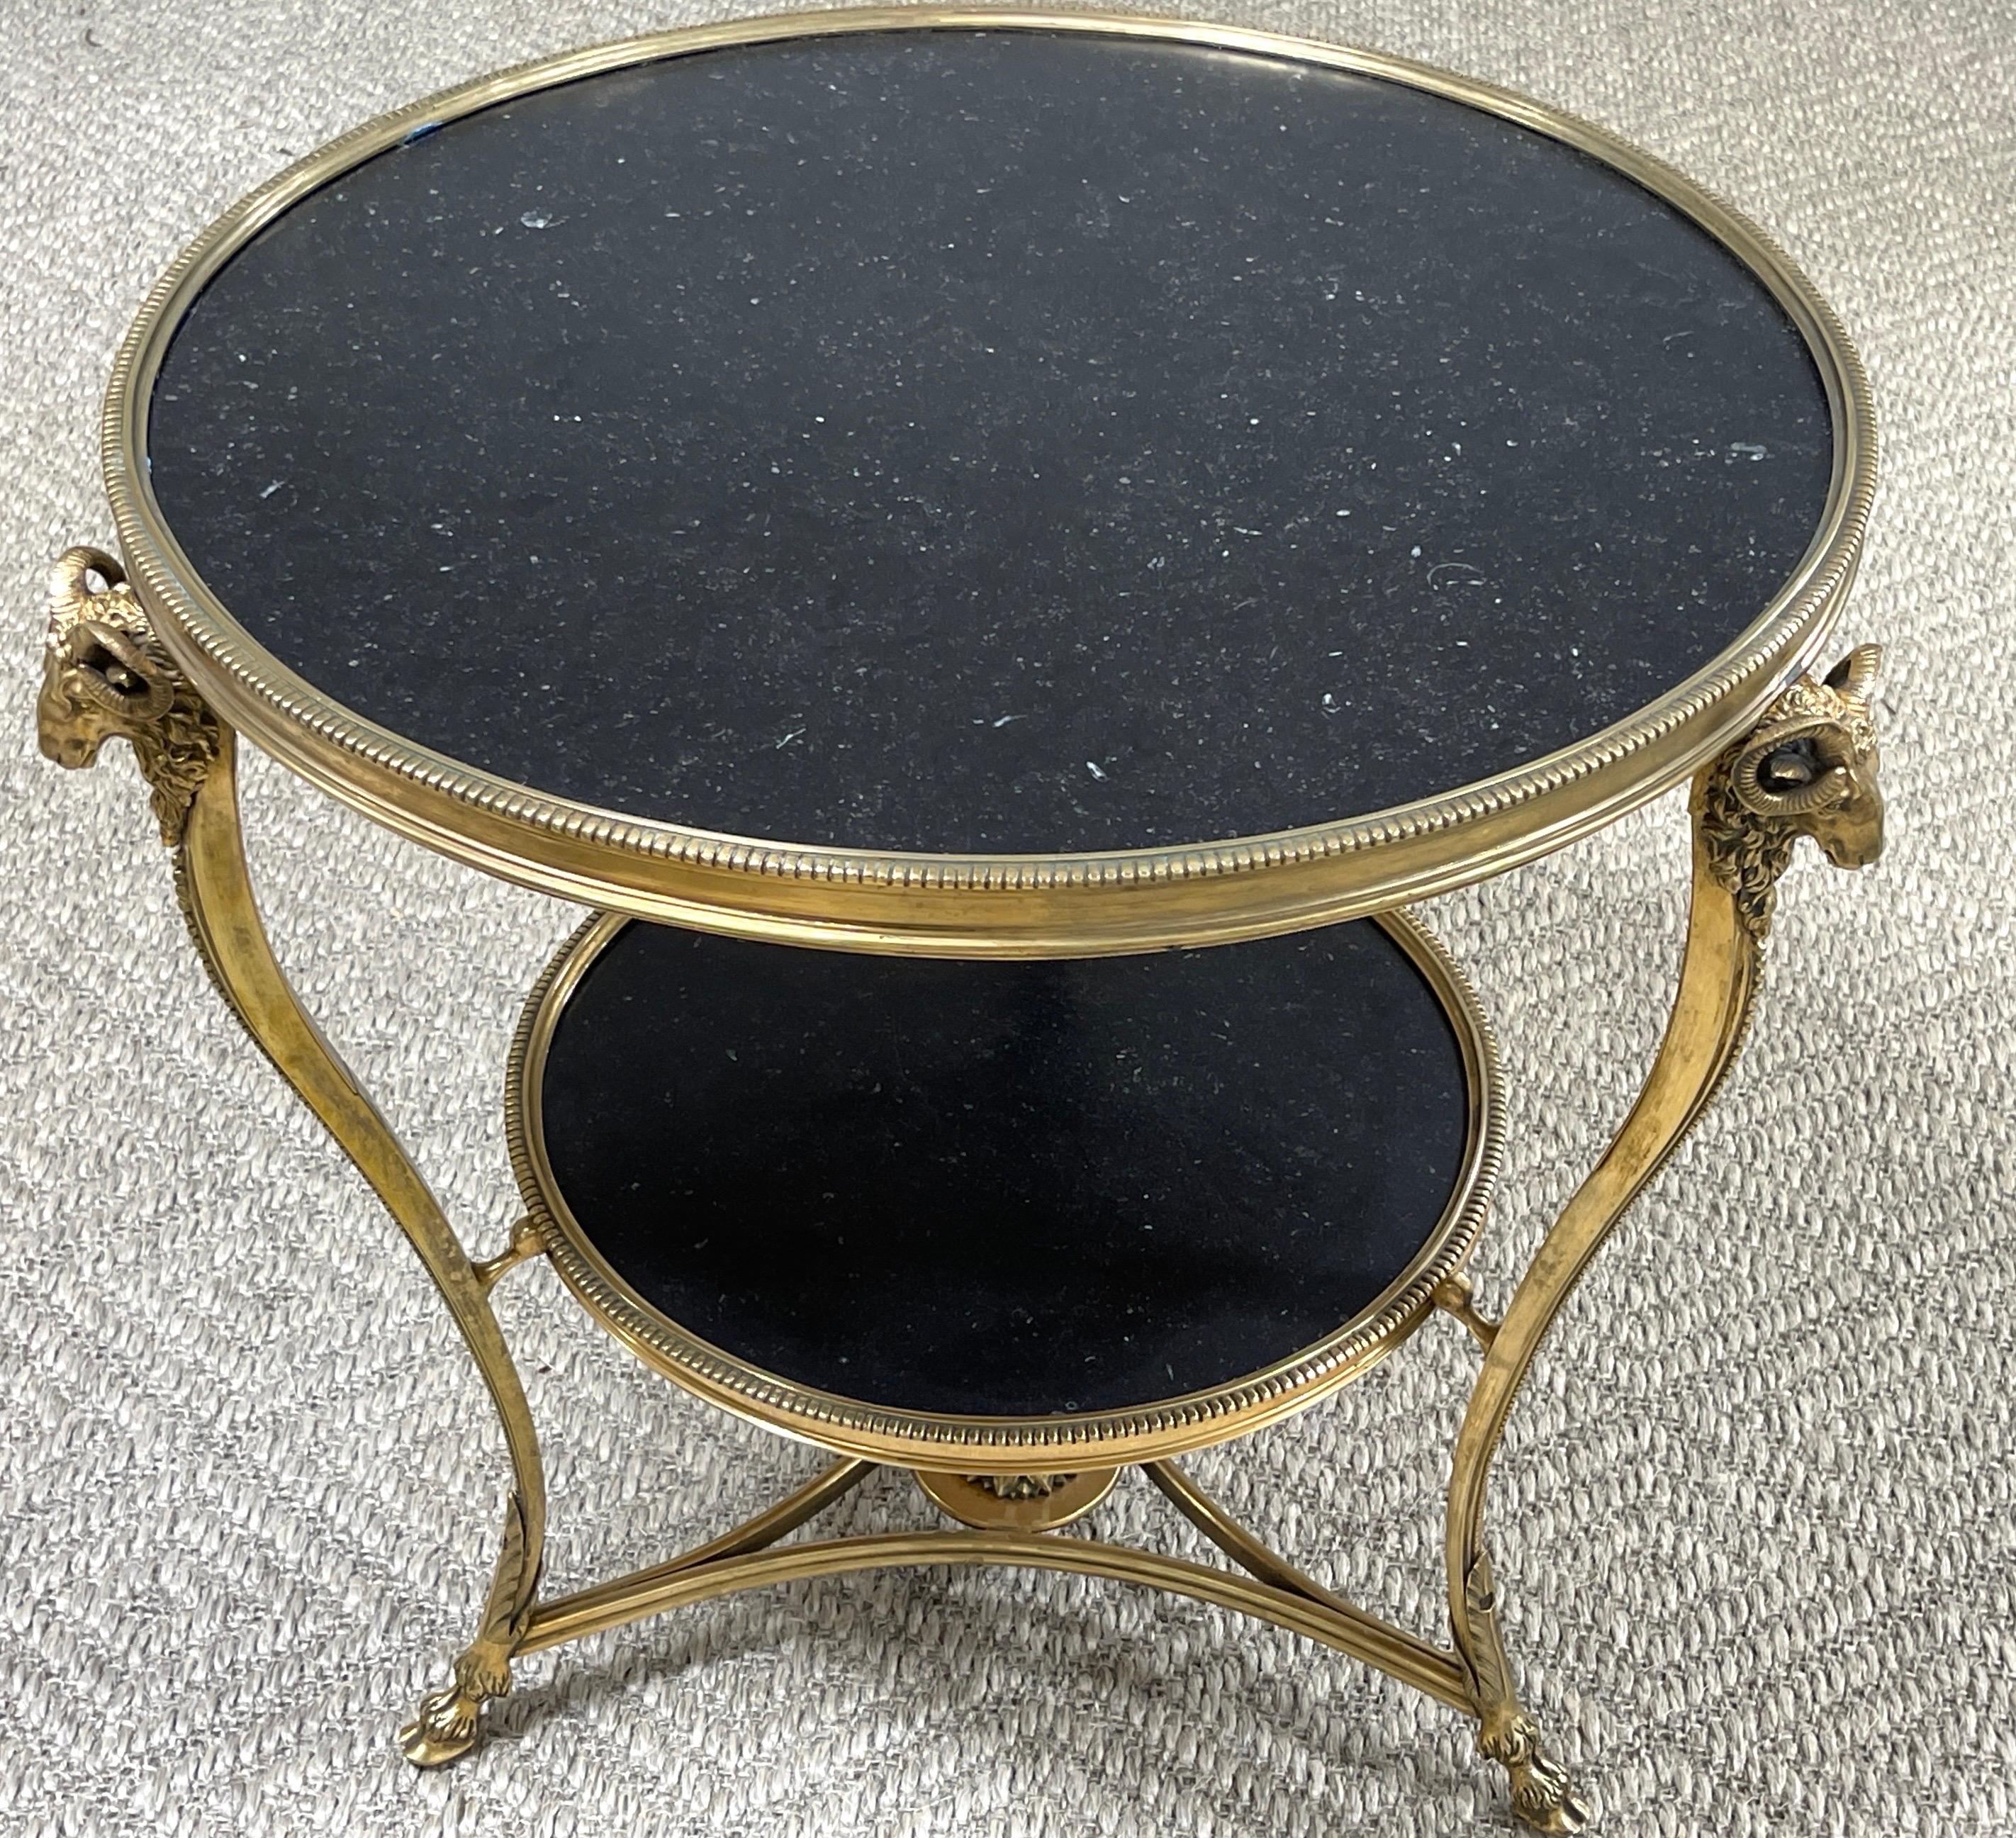 20th Century French Neoclassical Gilt Bronze Rams Head & Black Marble Gueridon Table